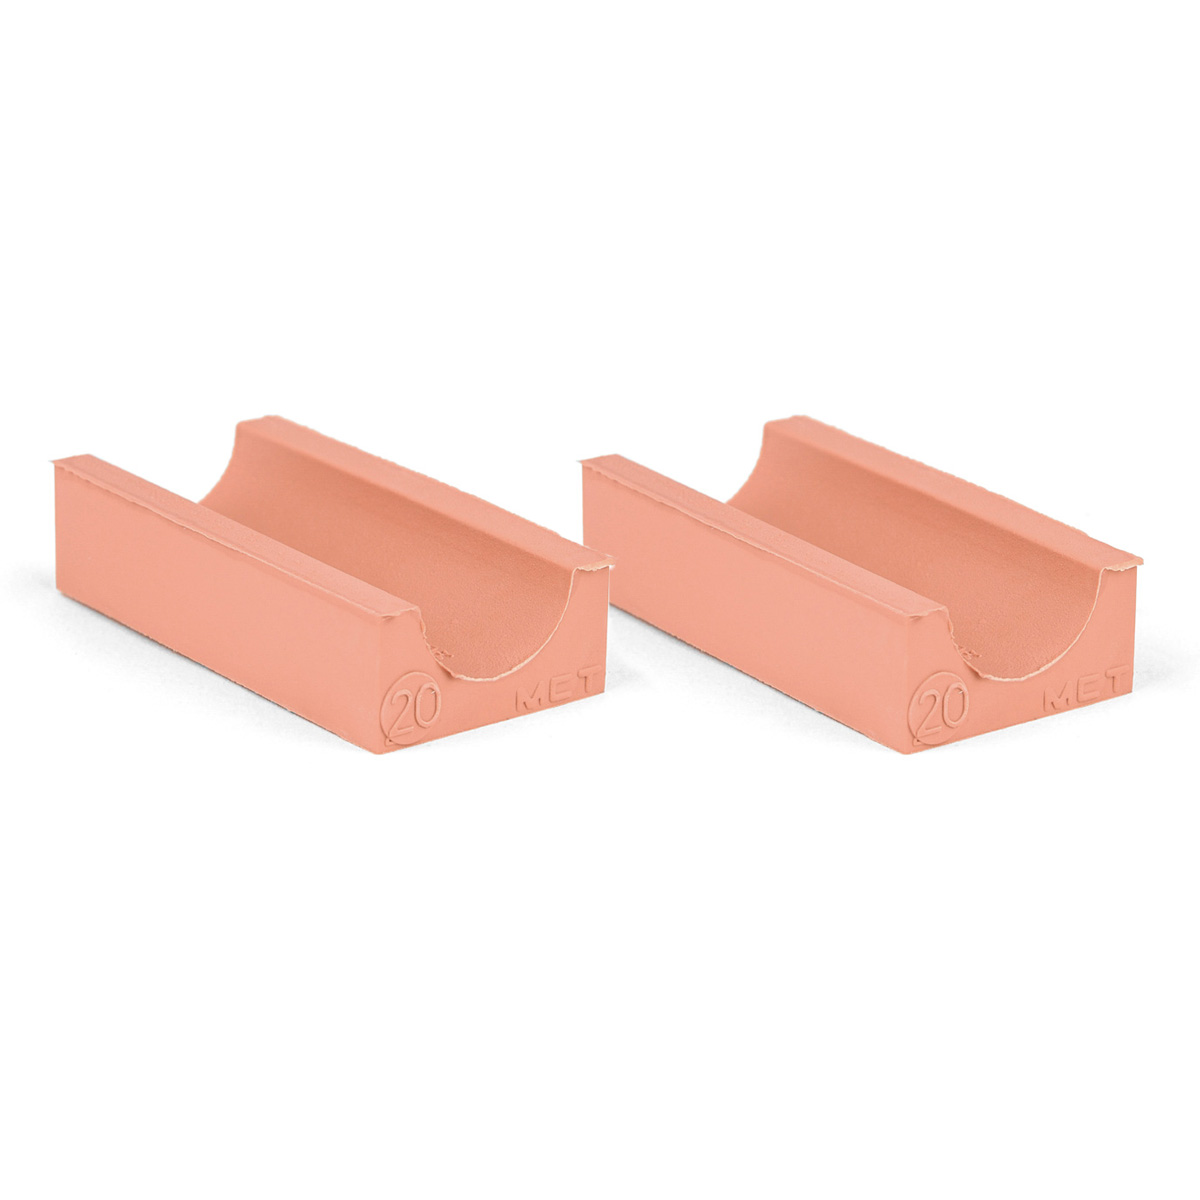 30-20*2 Set of 2 half insert block lycron, 30-20 for cable/pipe diam. 19.5-20.5mm